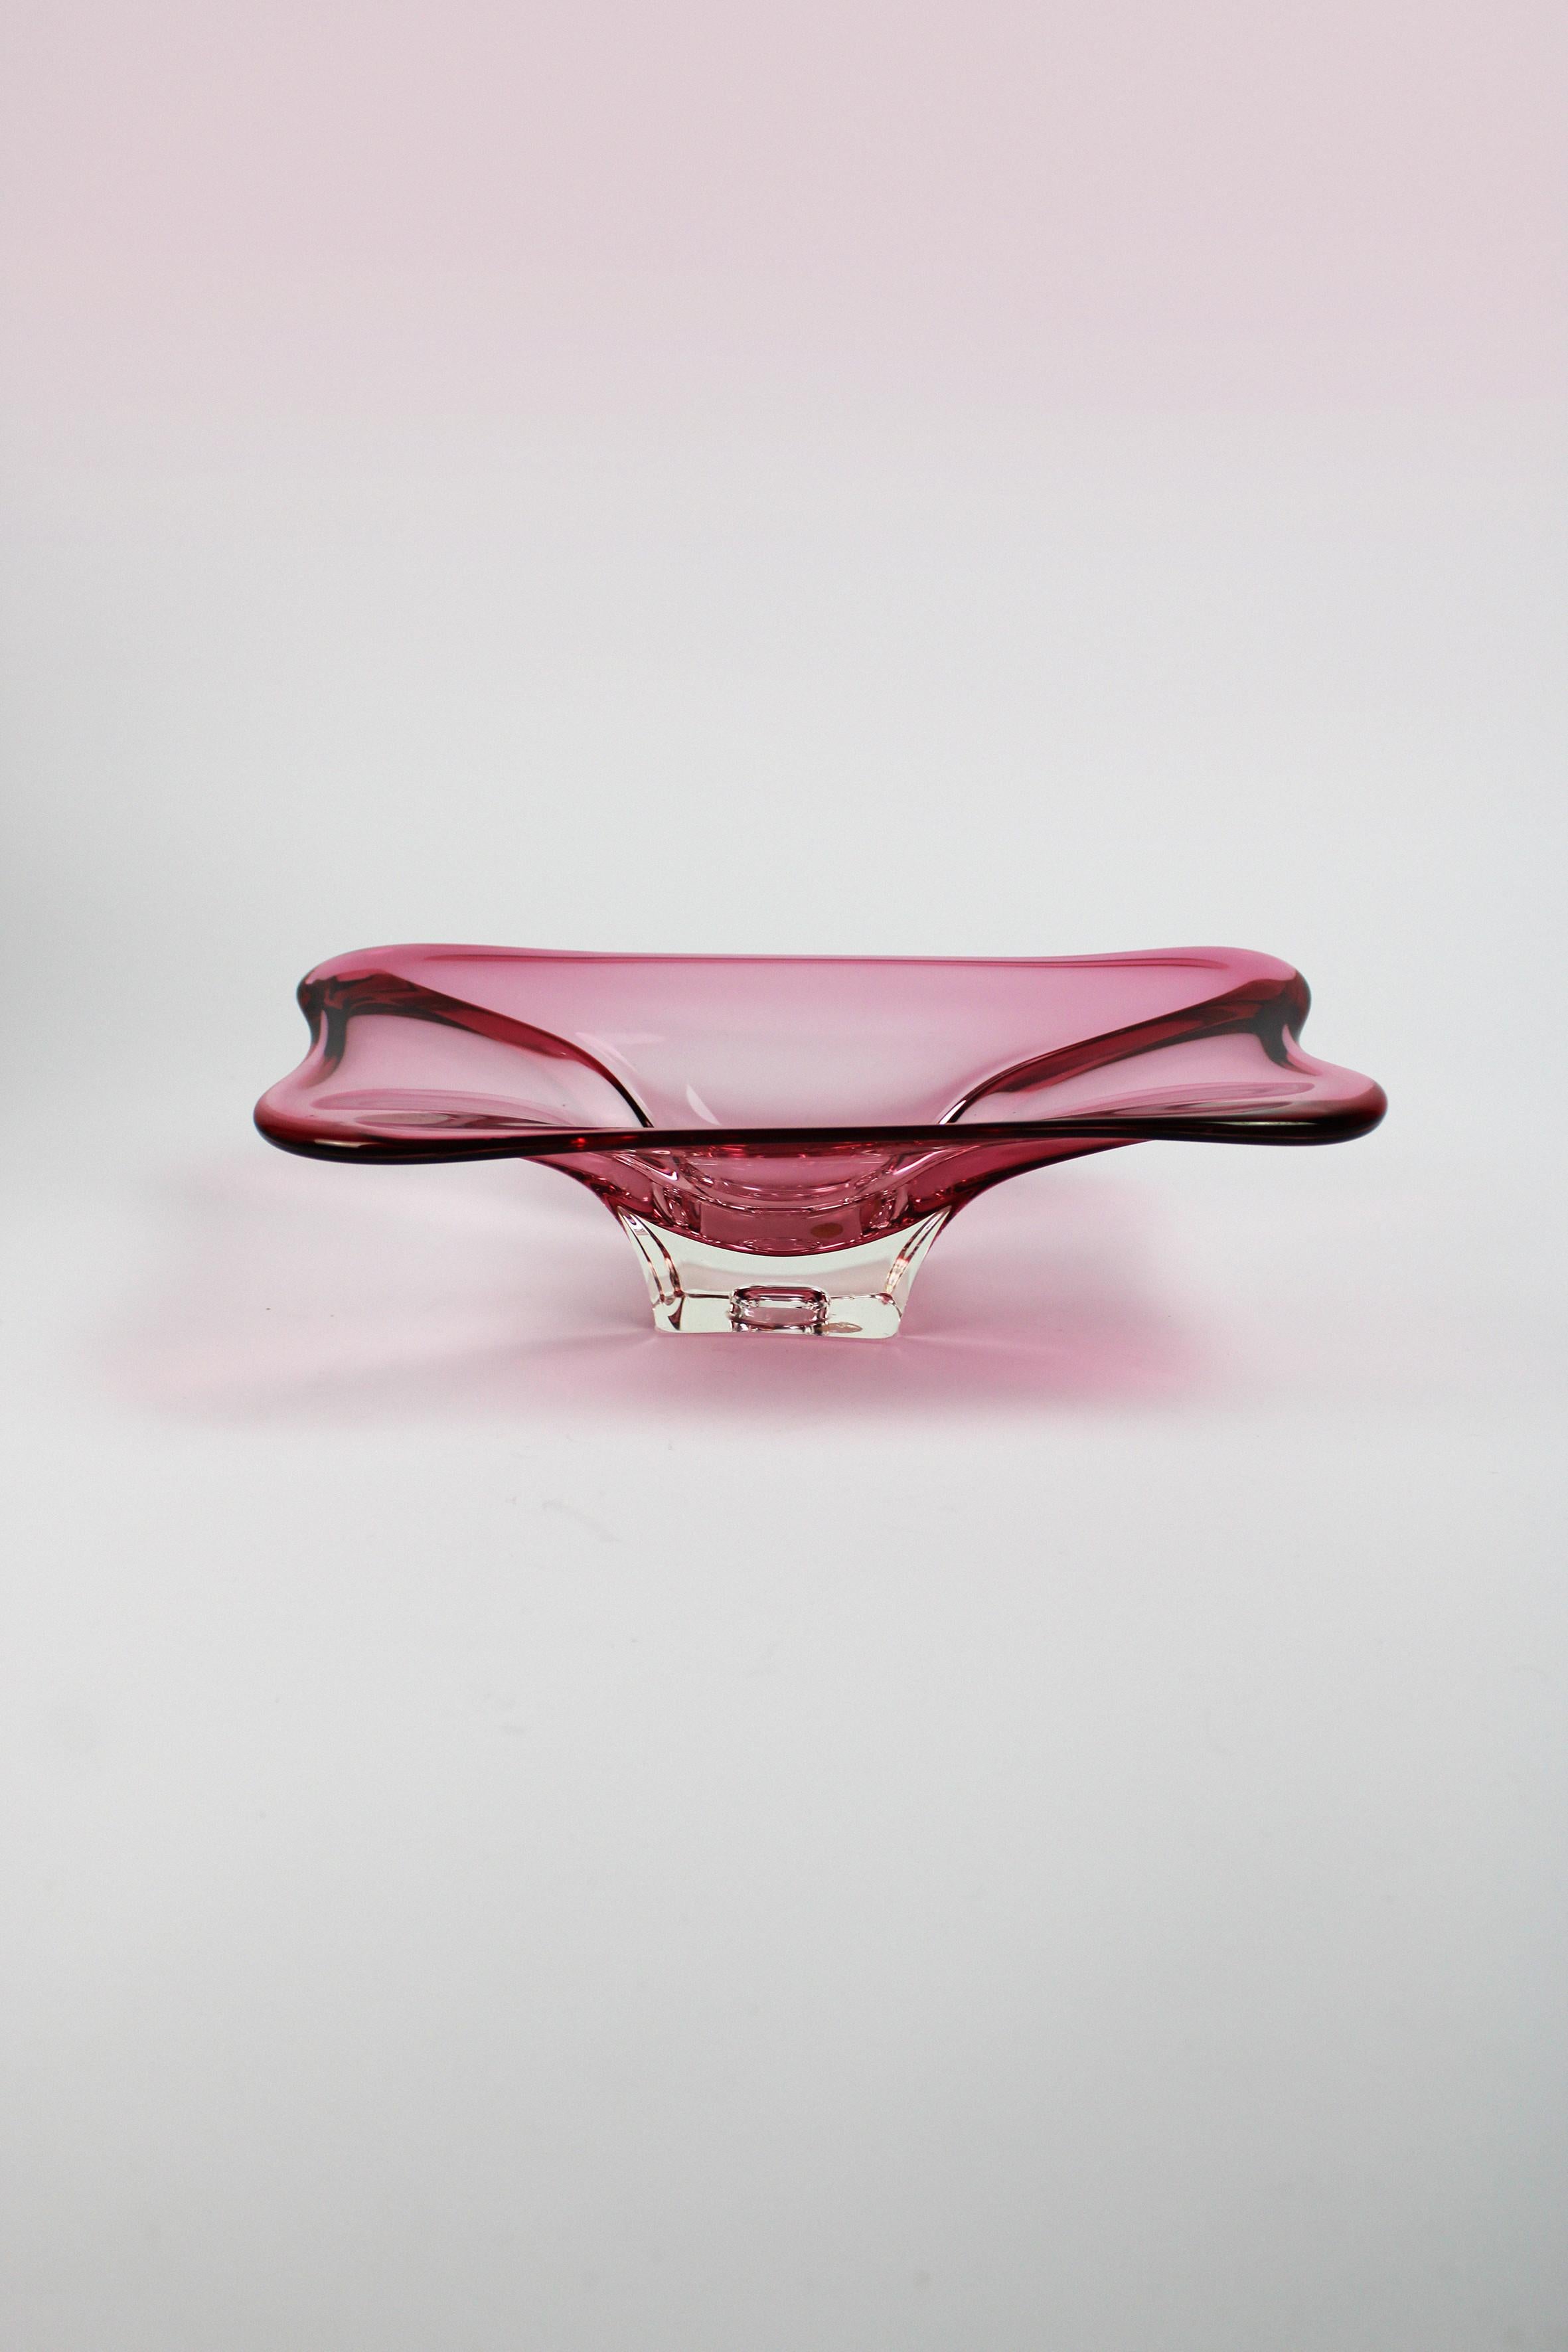 Introducing an organically shaped bowl or Vide-Poche, a masterpiece from the hand-blown Murano collection. Crafted from exquisite Murano glass in a captivating pink hue, this bowl showcases a beautiful and natural design. The artisanal glass-blowing